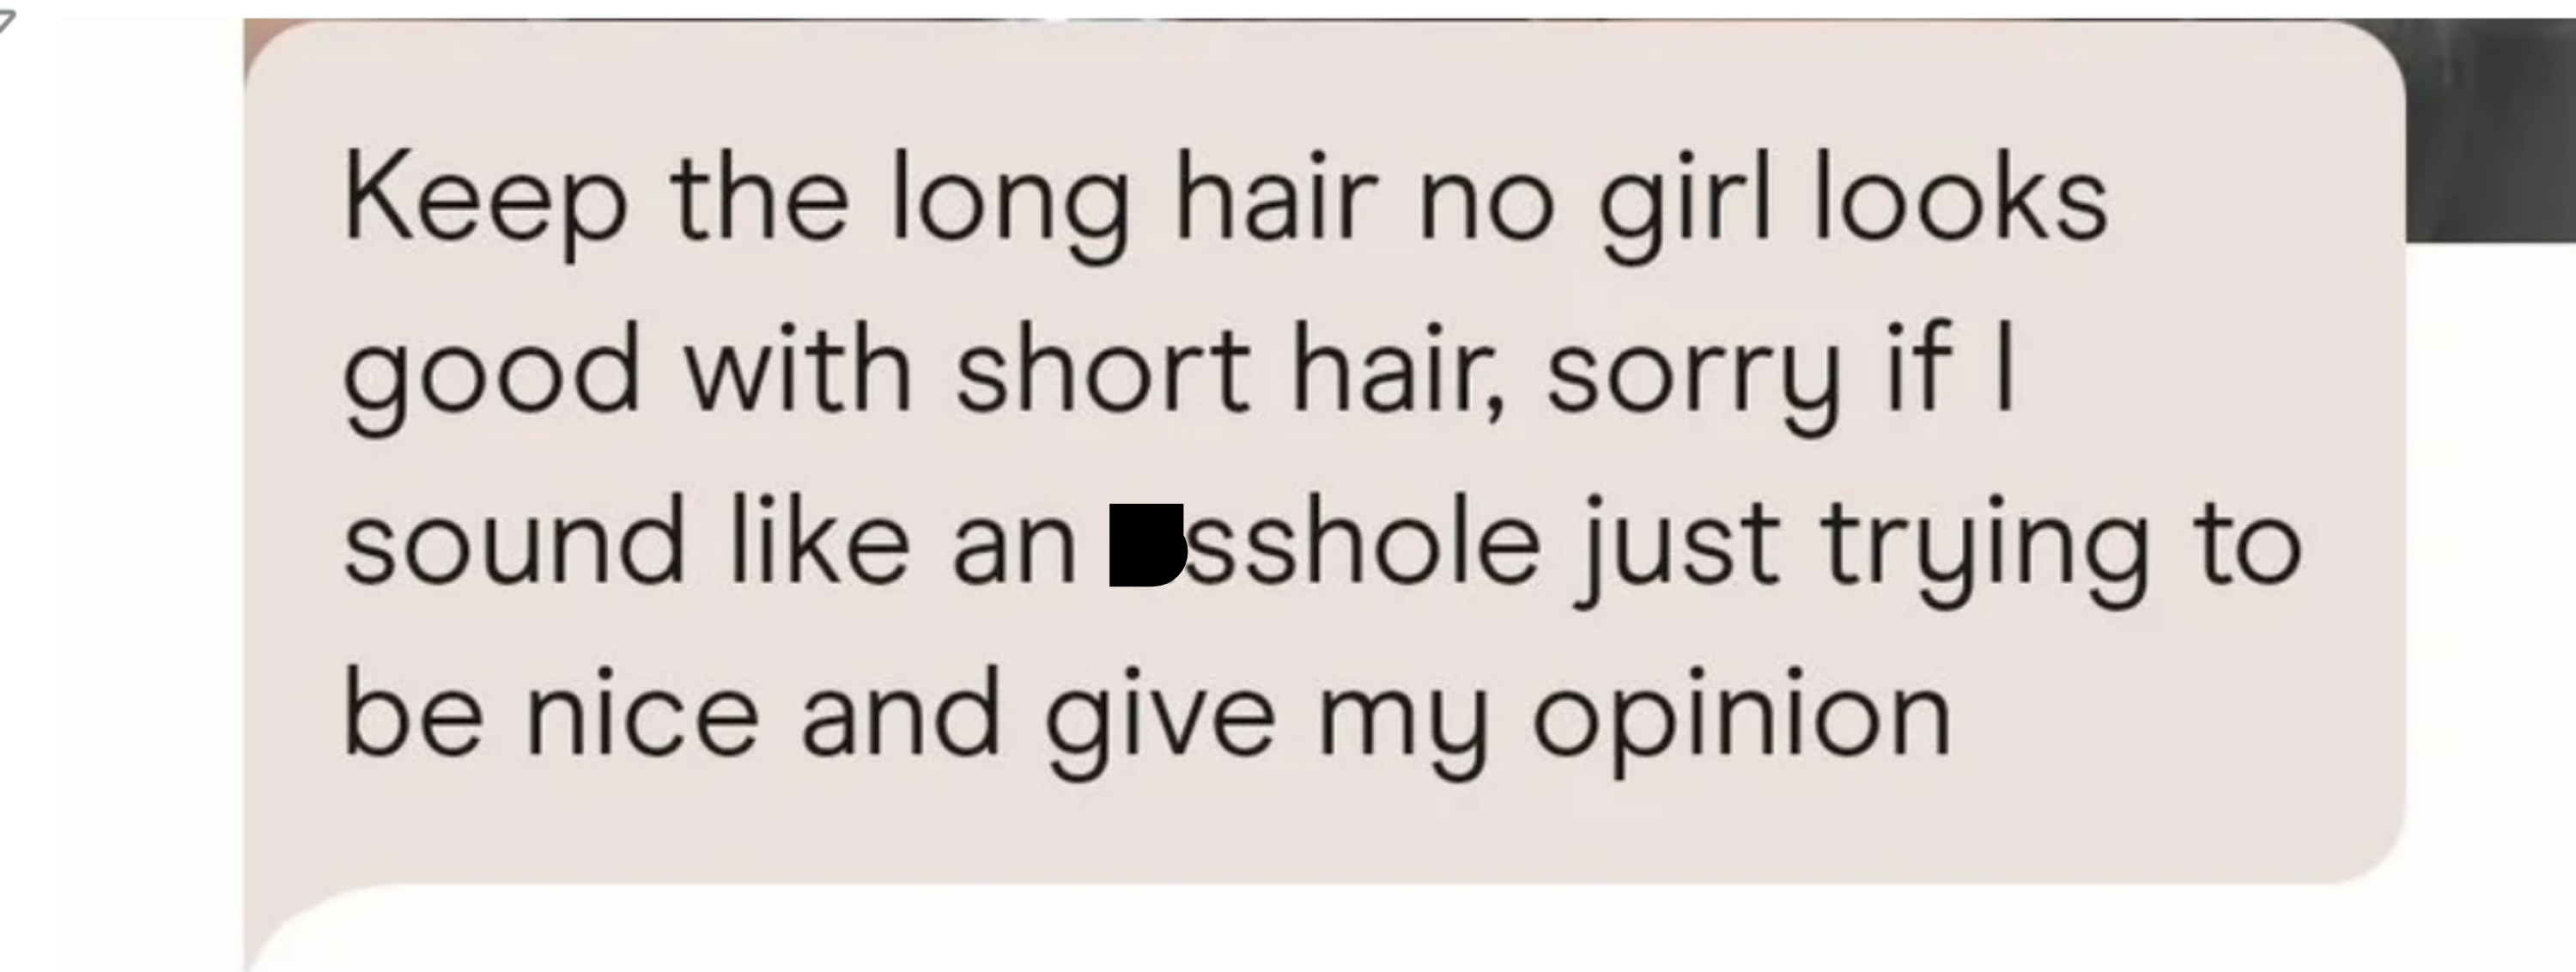 The text reads &quot;Keep the long hair, no girl looks good with short hair, sorry if I sound like an asshole, just trying to be nice and give my opinion&quot;